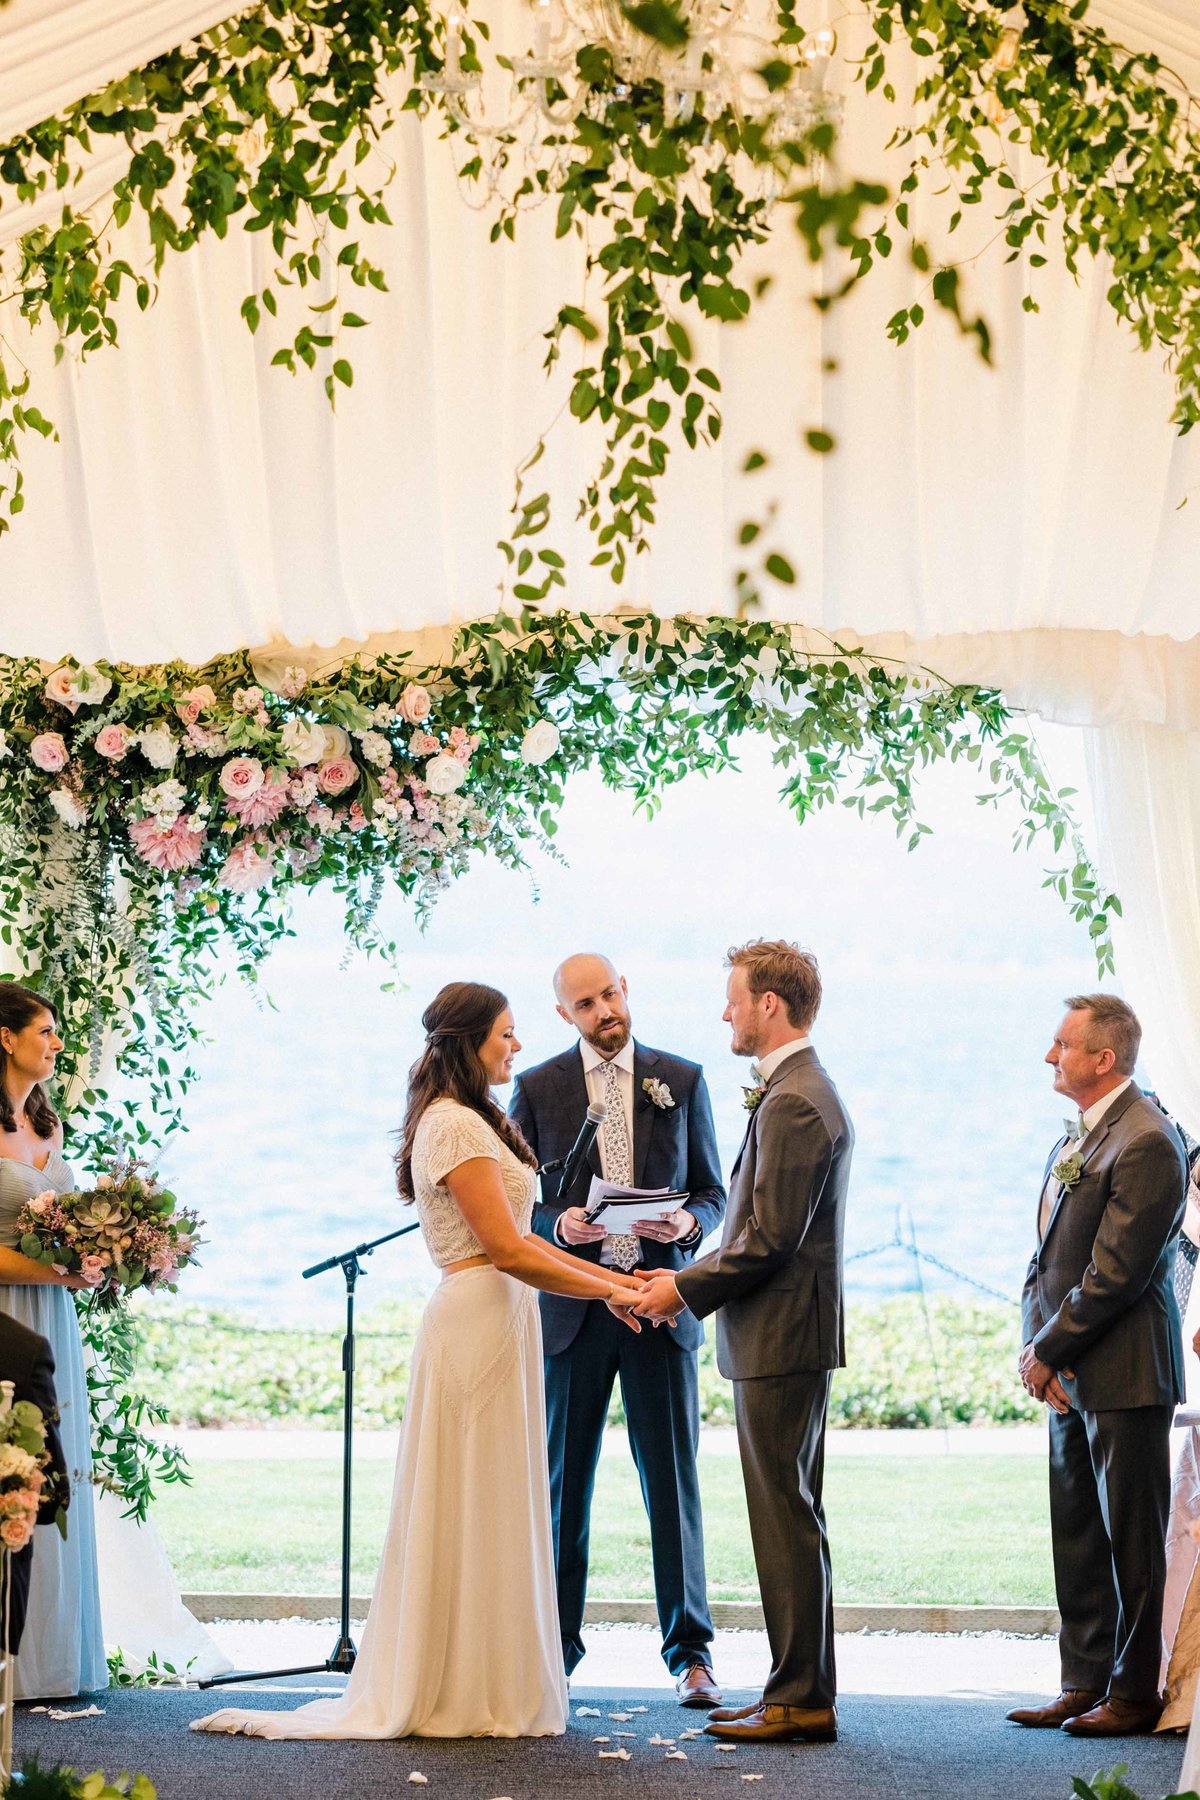 tent wedding ceremony with a romantic pink, white and green floral arch